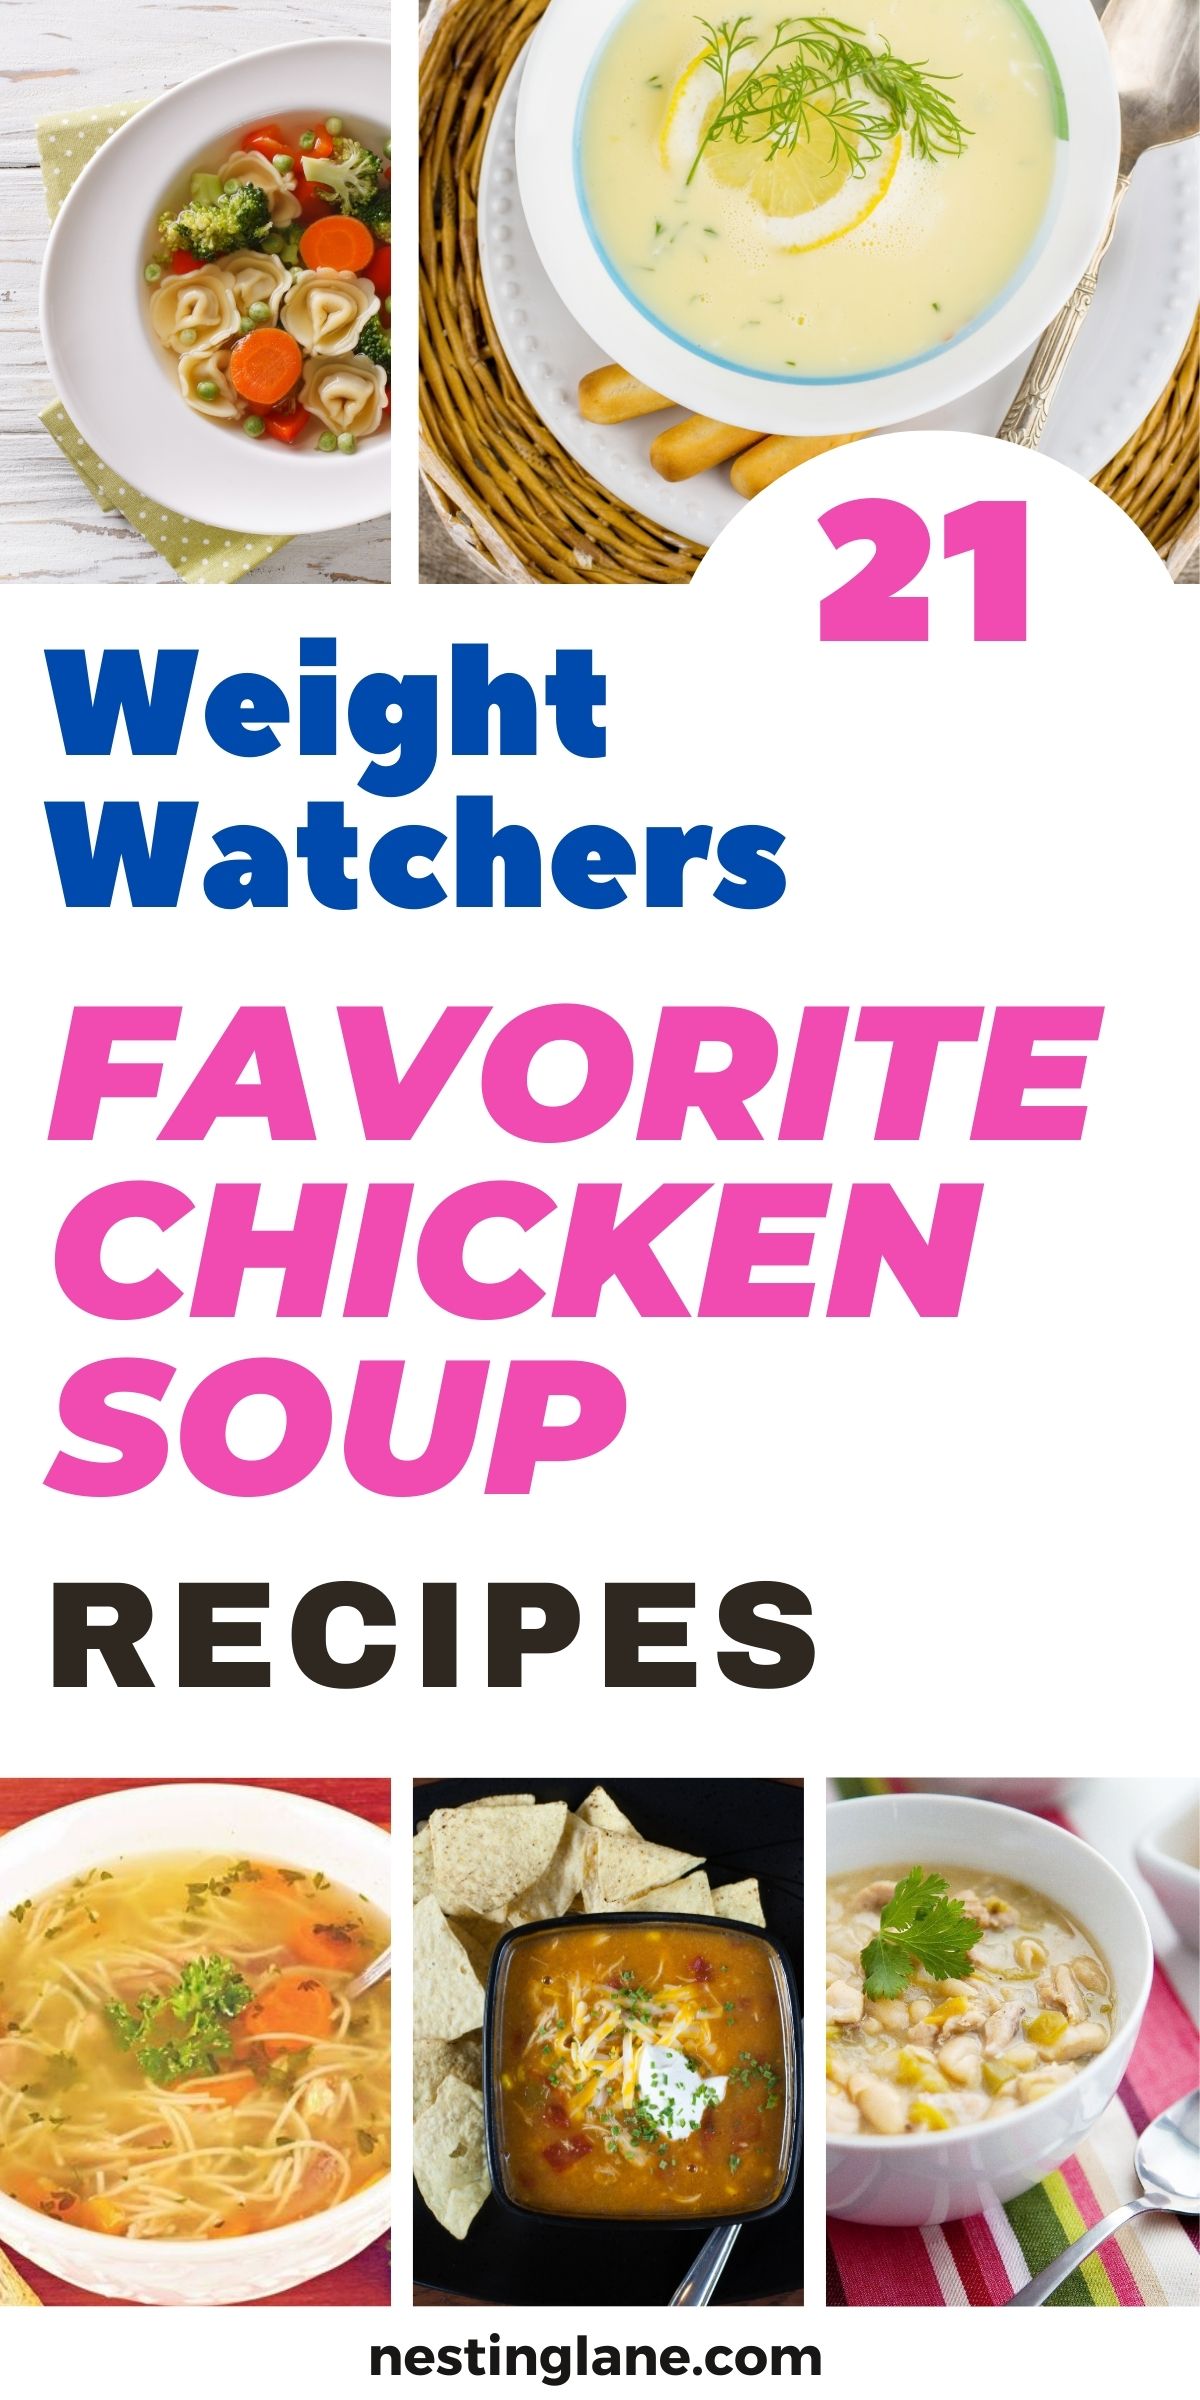 Graphic for Pinterest of 21 Weight Watchers Chicken Soup Recipes.